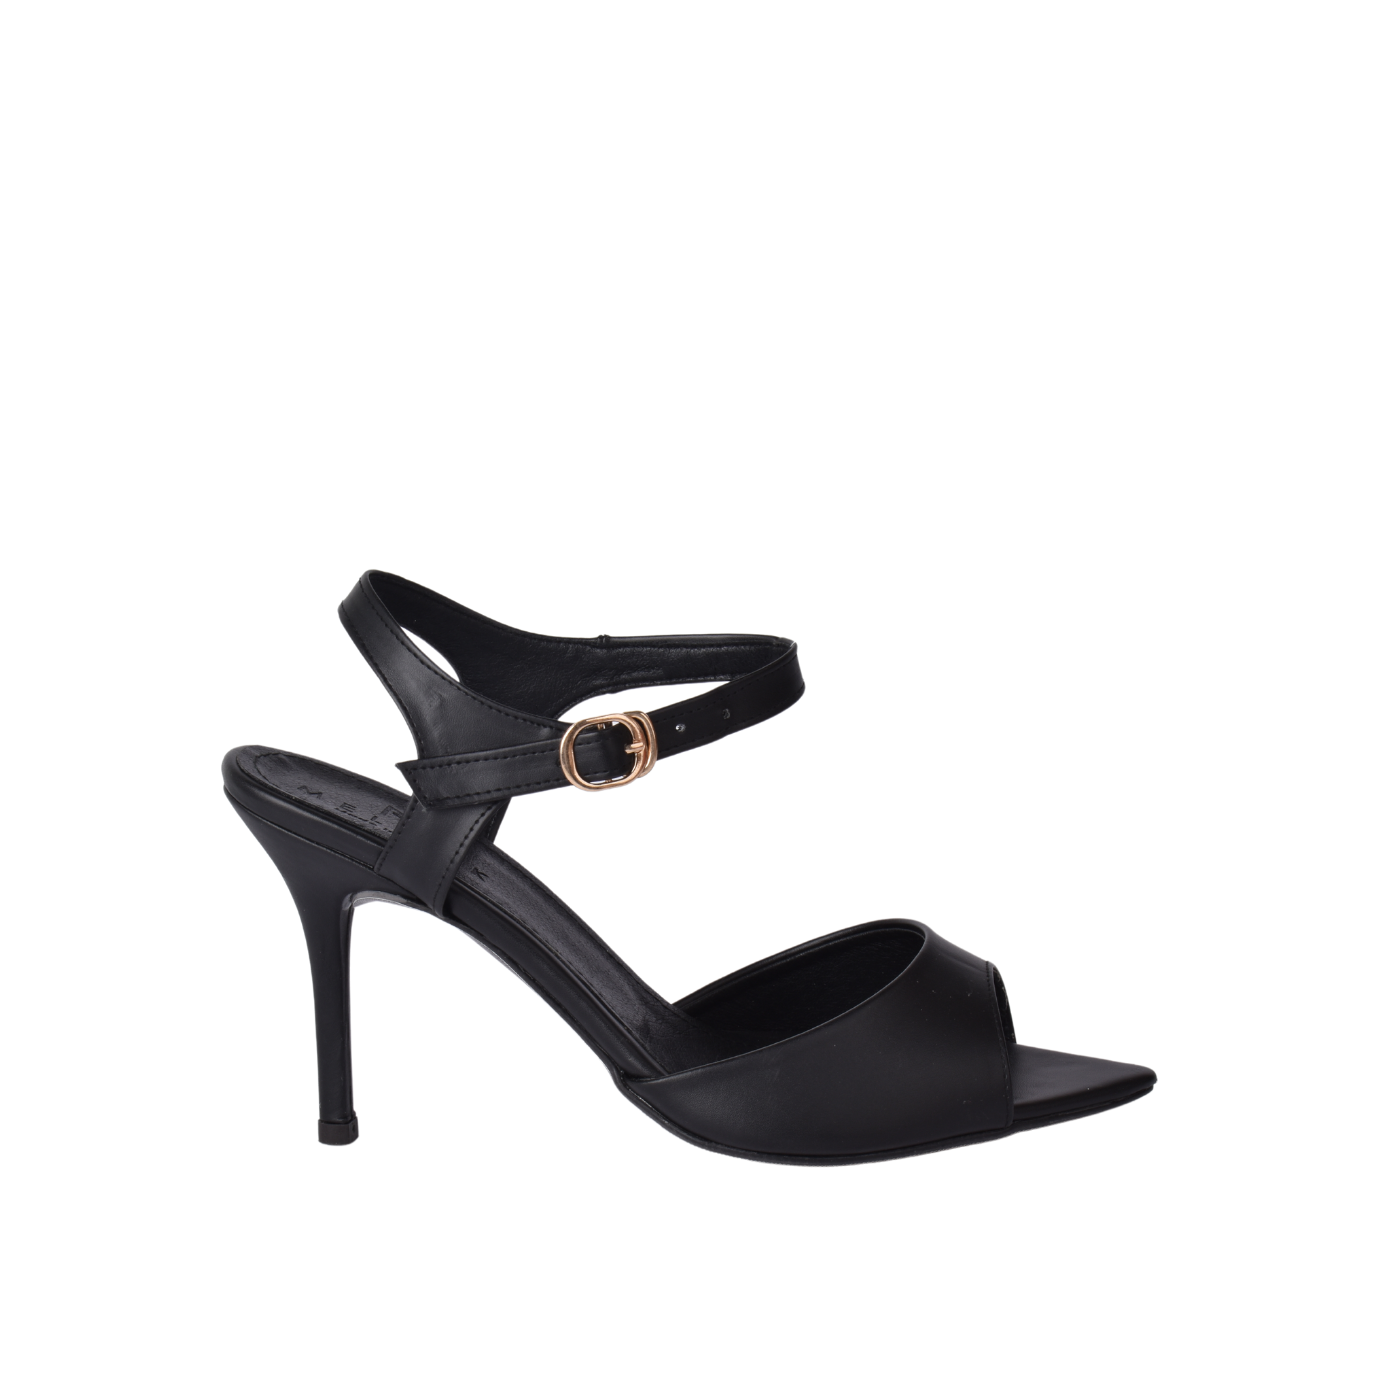 Sandal Buckle Mule with Slingback Strap